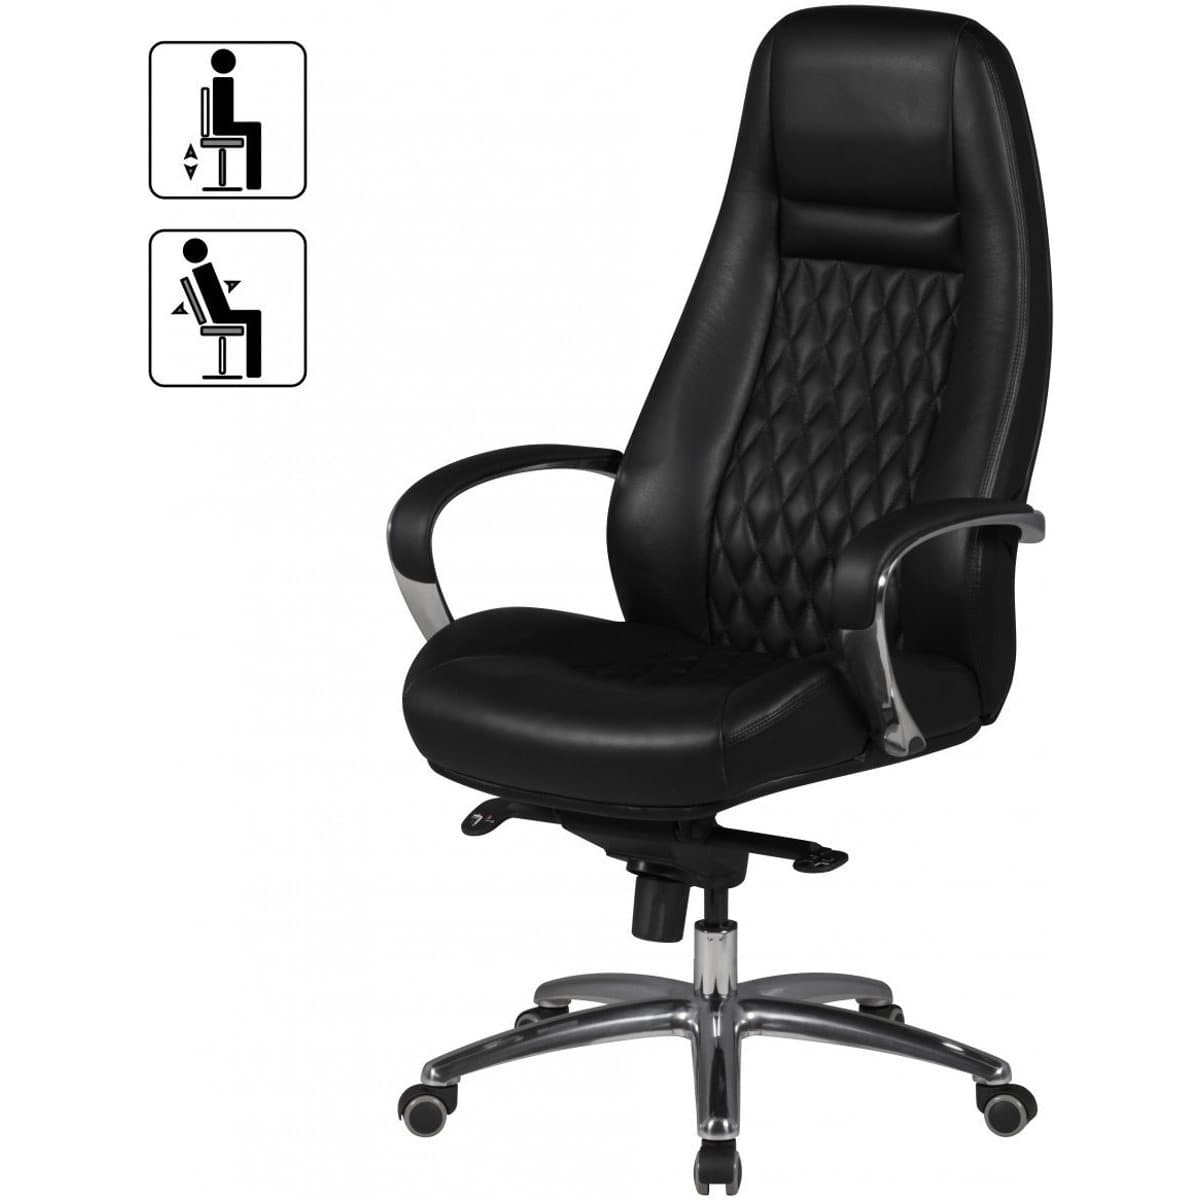 Nancy's Bronxdale Leather Office Chair - Swivel Leather Chair - Ergonomic Office Chairs - Office Chairs For Adults